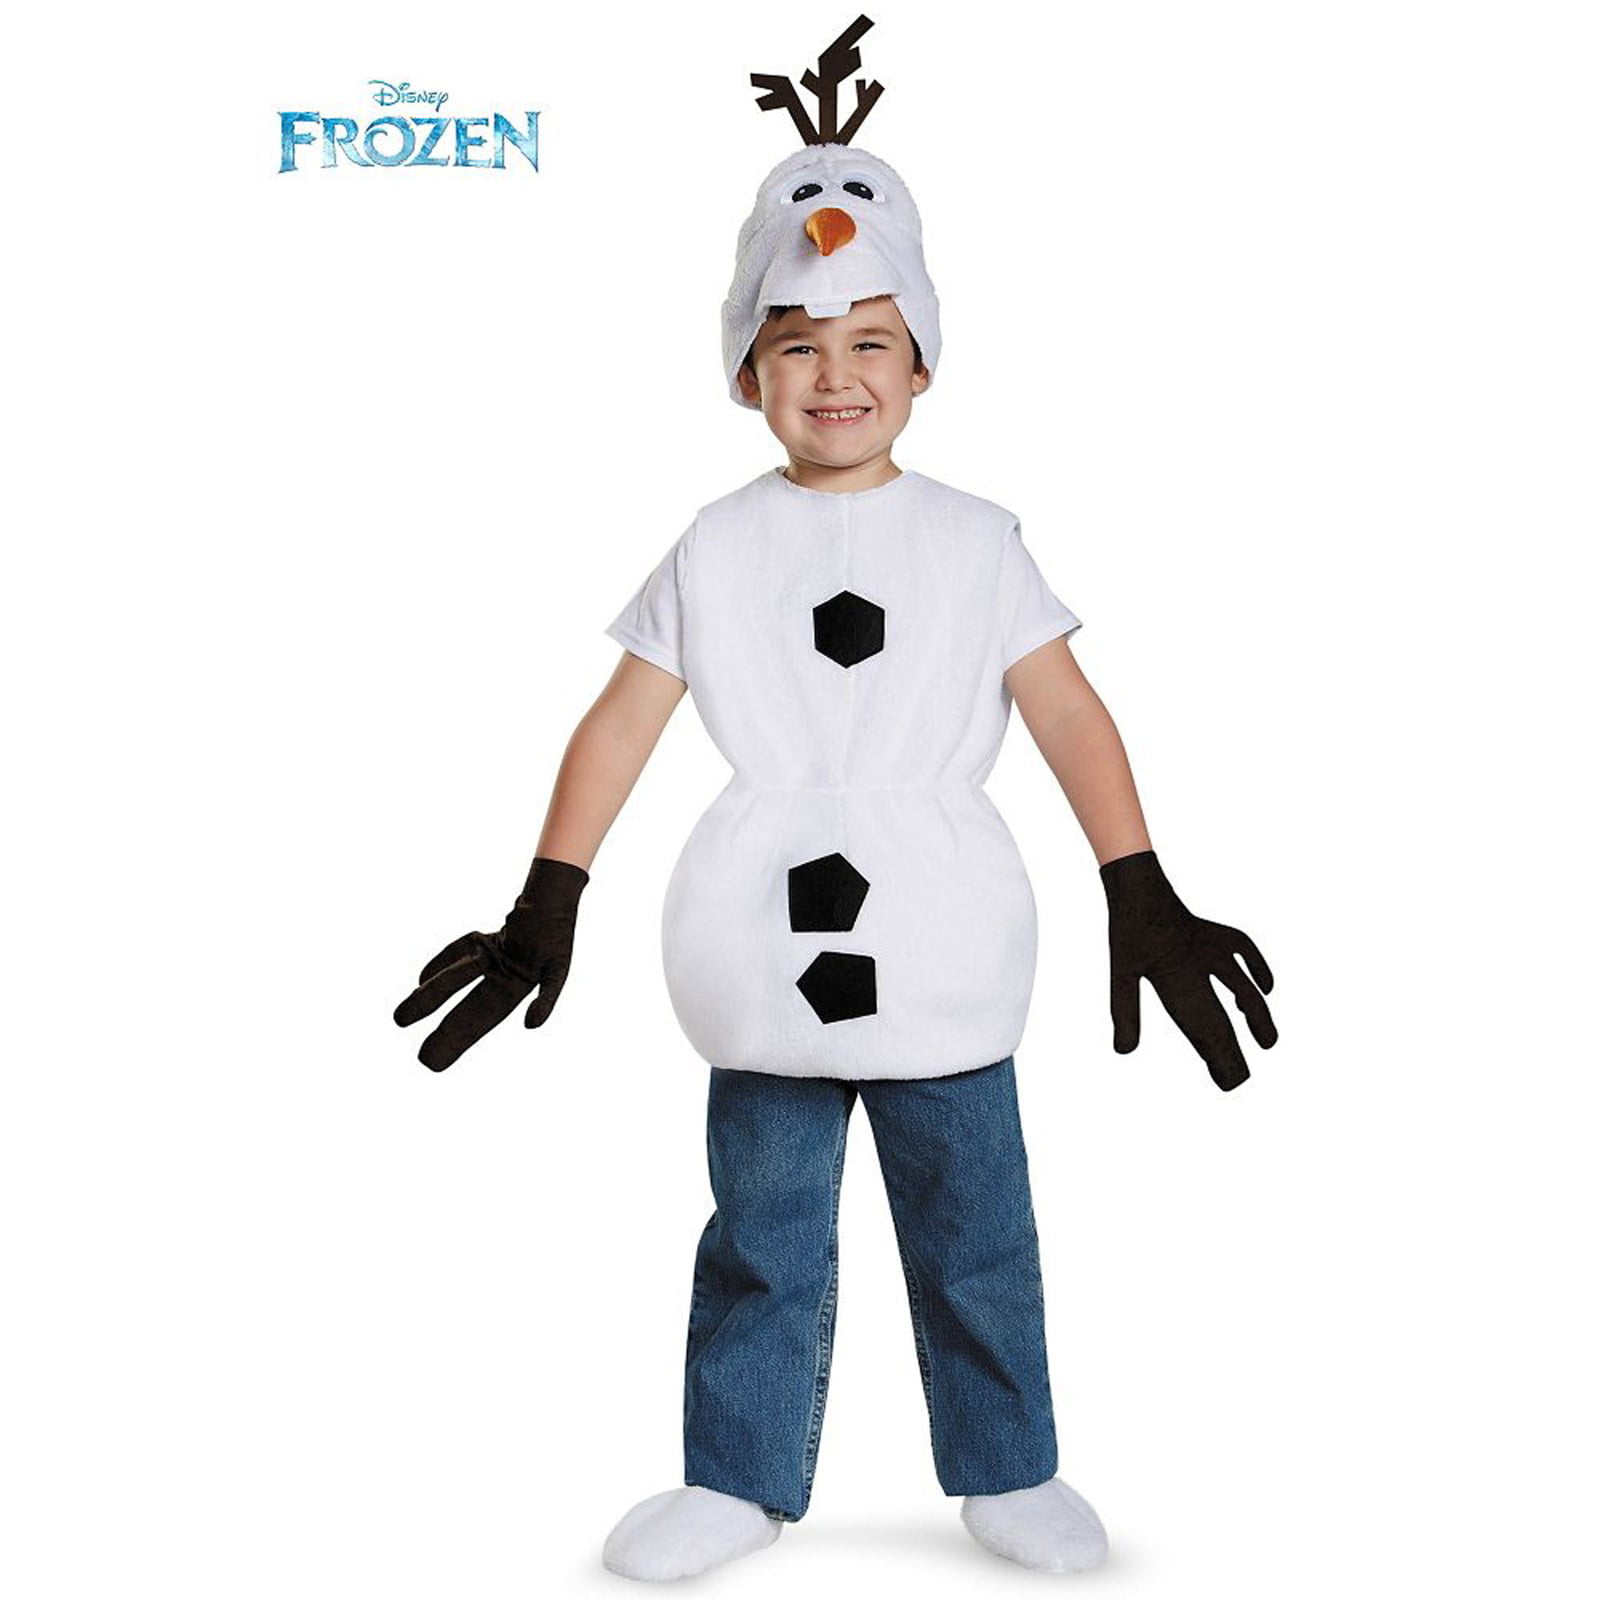 NEW Disney Frozen Olaf Deluxe Toddler Costume --FREE SHIPPING